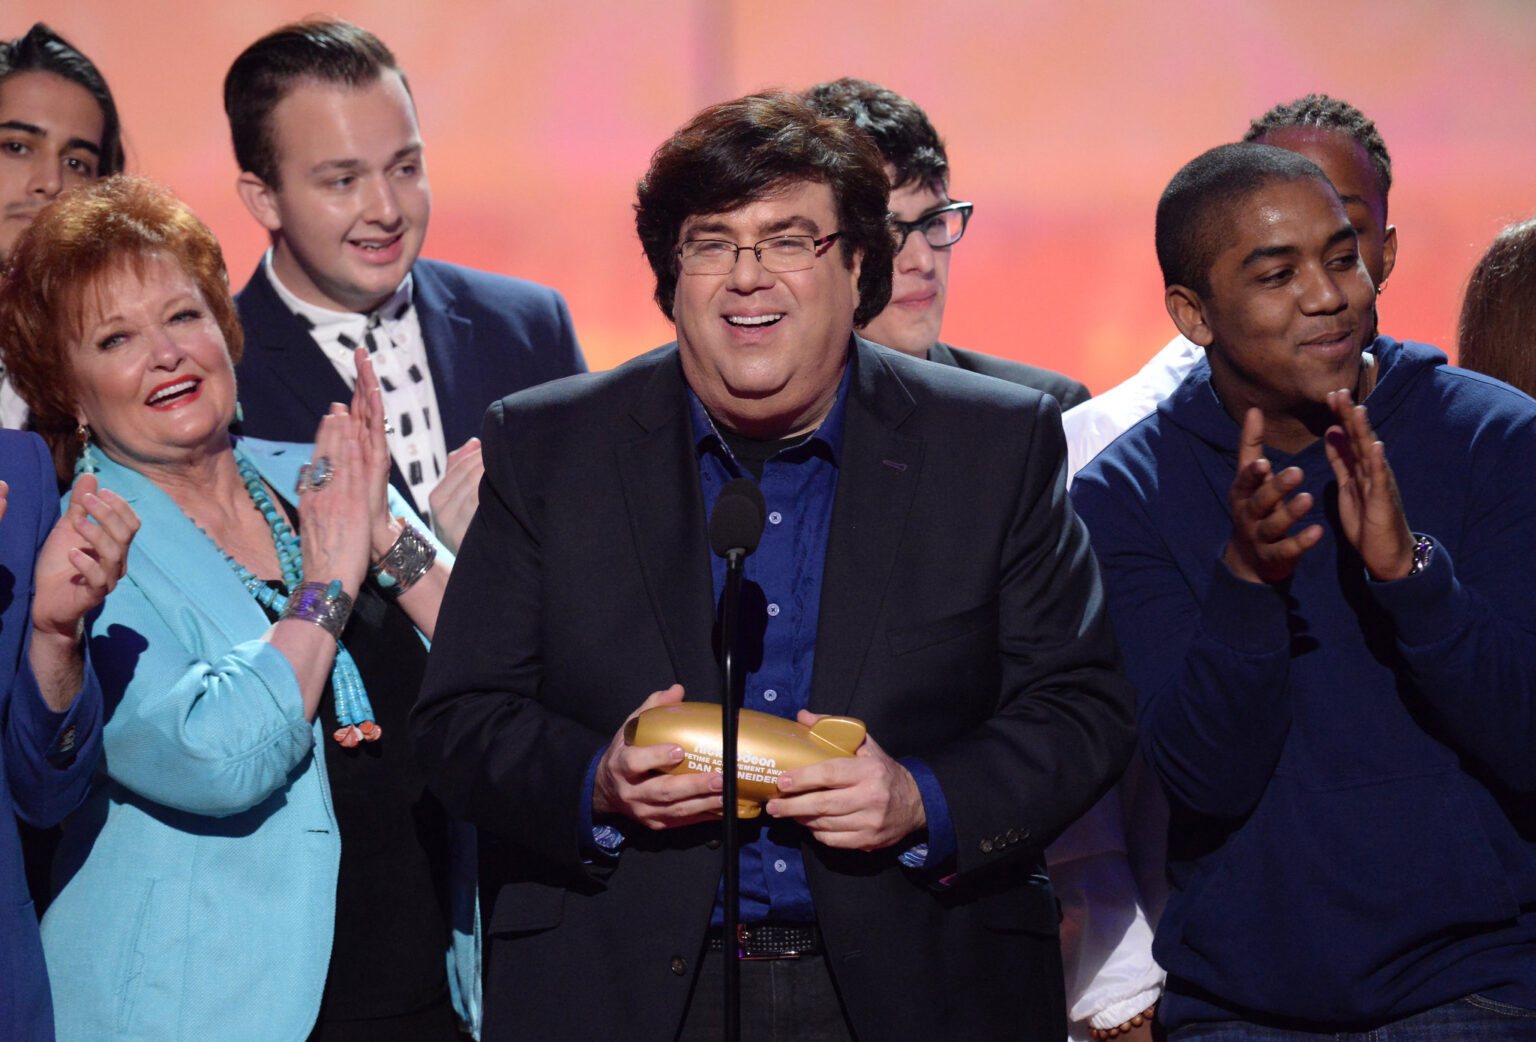 Dan Schneider, the once famed producer of many beloved Nickelodeon shows just can't stay out of the headlines. Will his reputation remain all that?